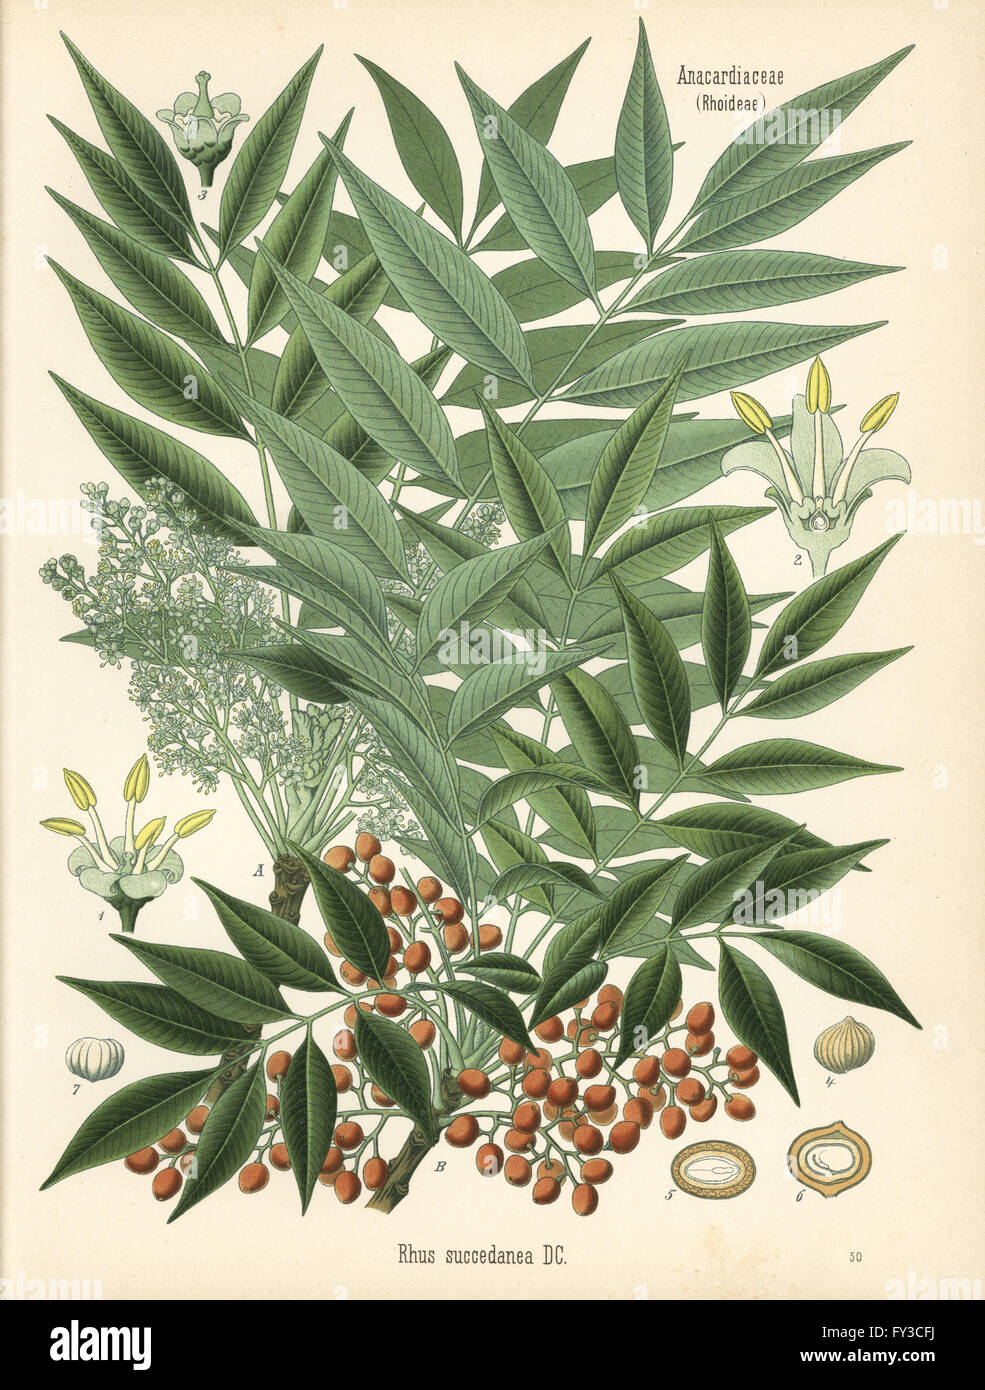 Japanese wax tree, Toxicodendron acuminatum (Rhus succedanea). Chromolithograph after a botanical illustration from Hermann Adolph Koehler's Medicinal Plants, edited by Gustav Pabst, Koehler, Germany, 1887. Stock Photo